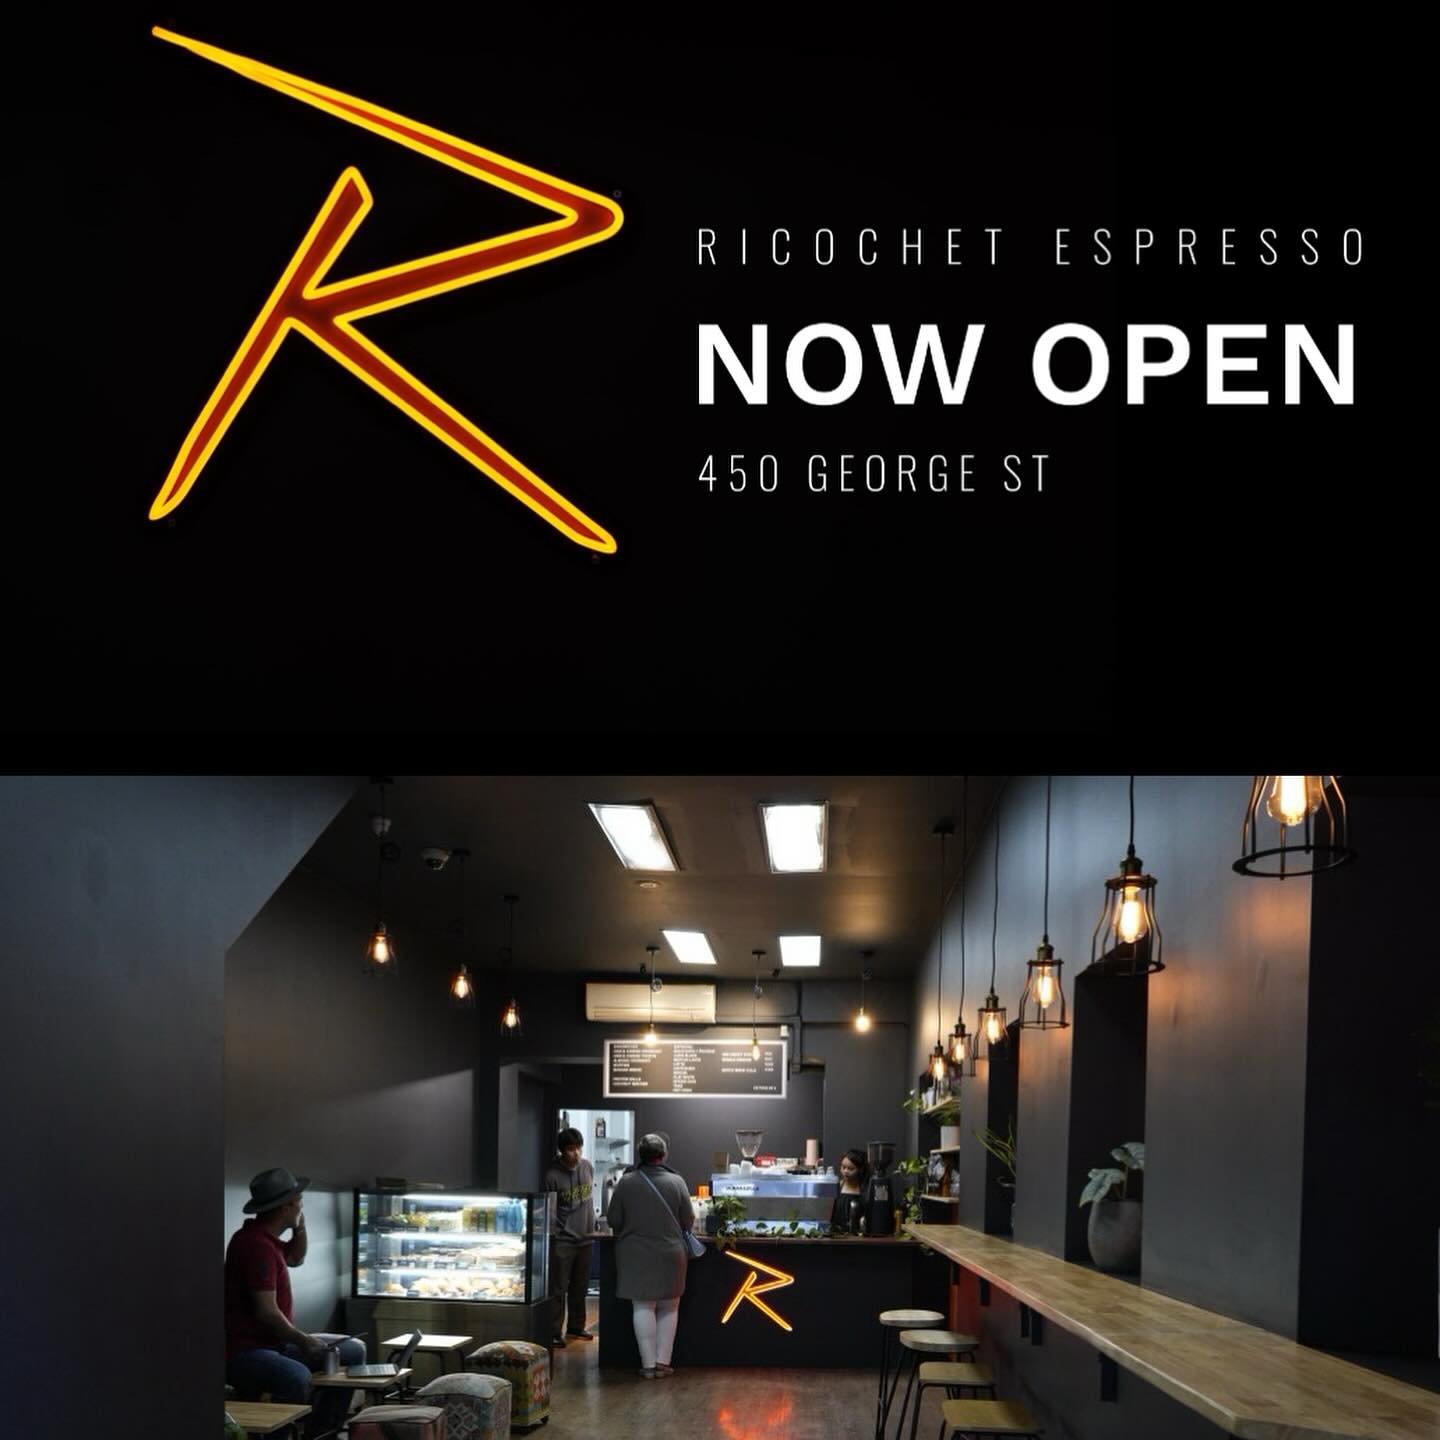 Ricochet Espresso has now opened on George Street. You can find us opposite the Law Courts and just down from Subway.

Come and say hi and please share with your friends.